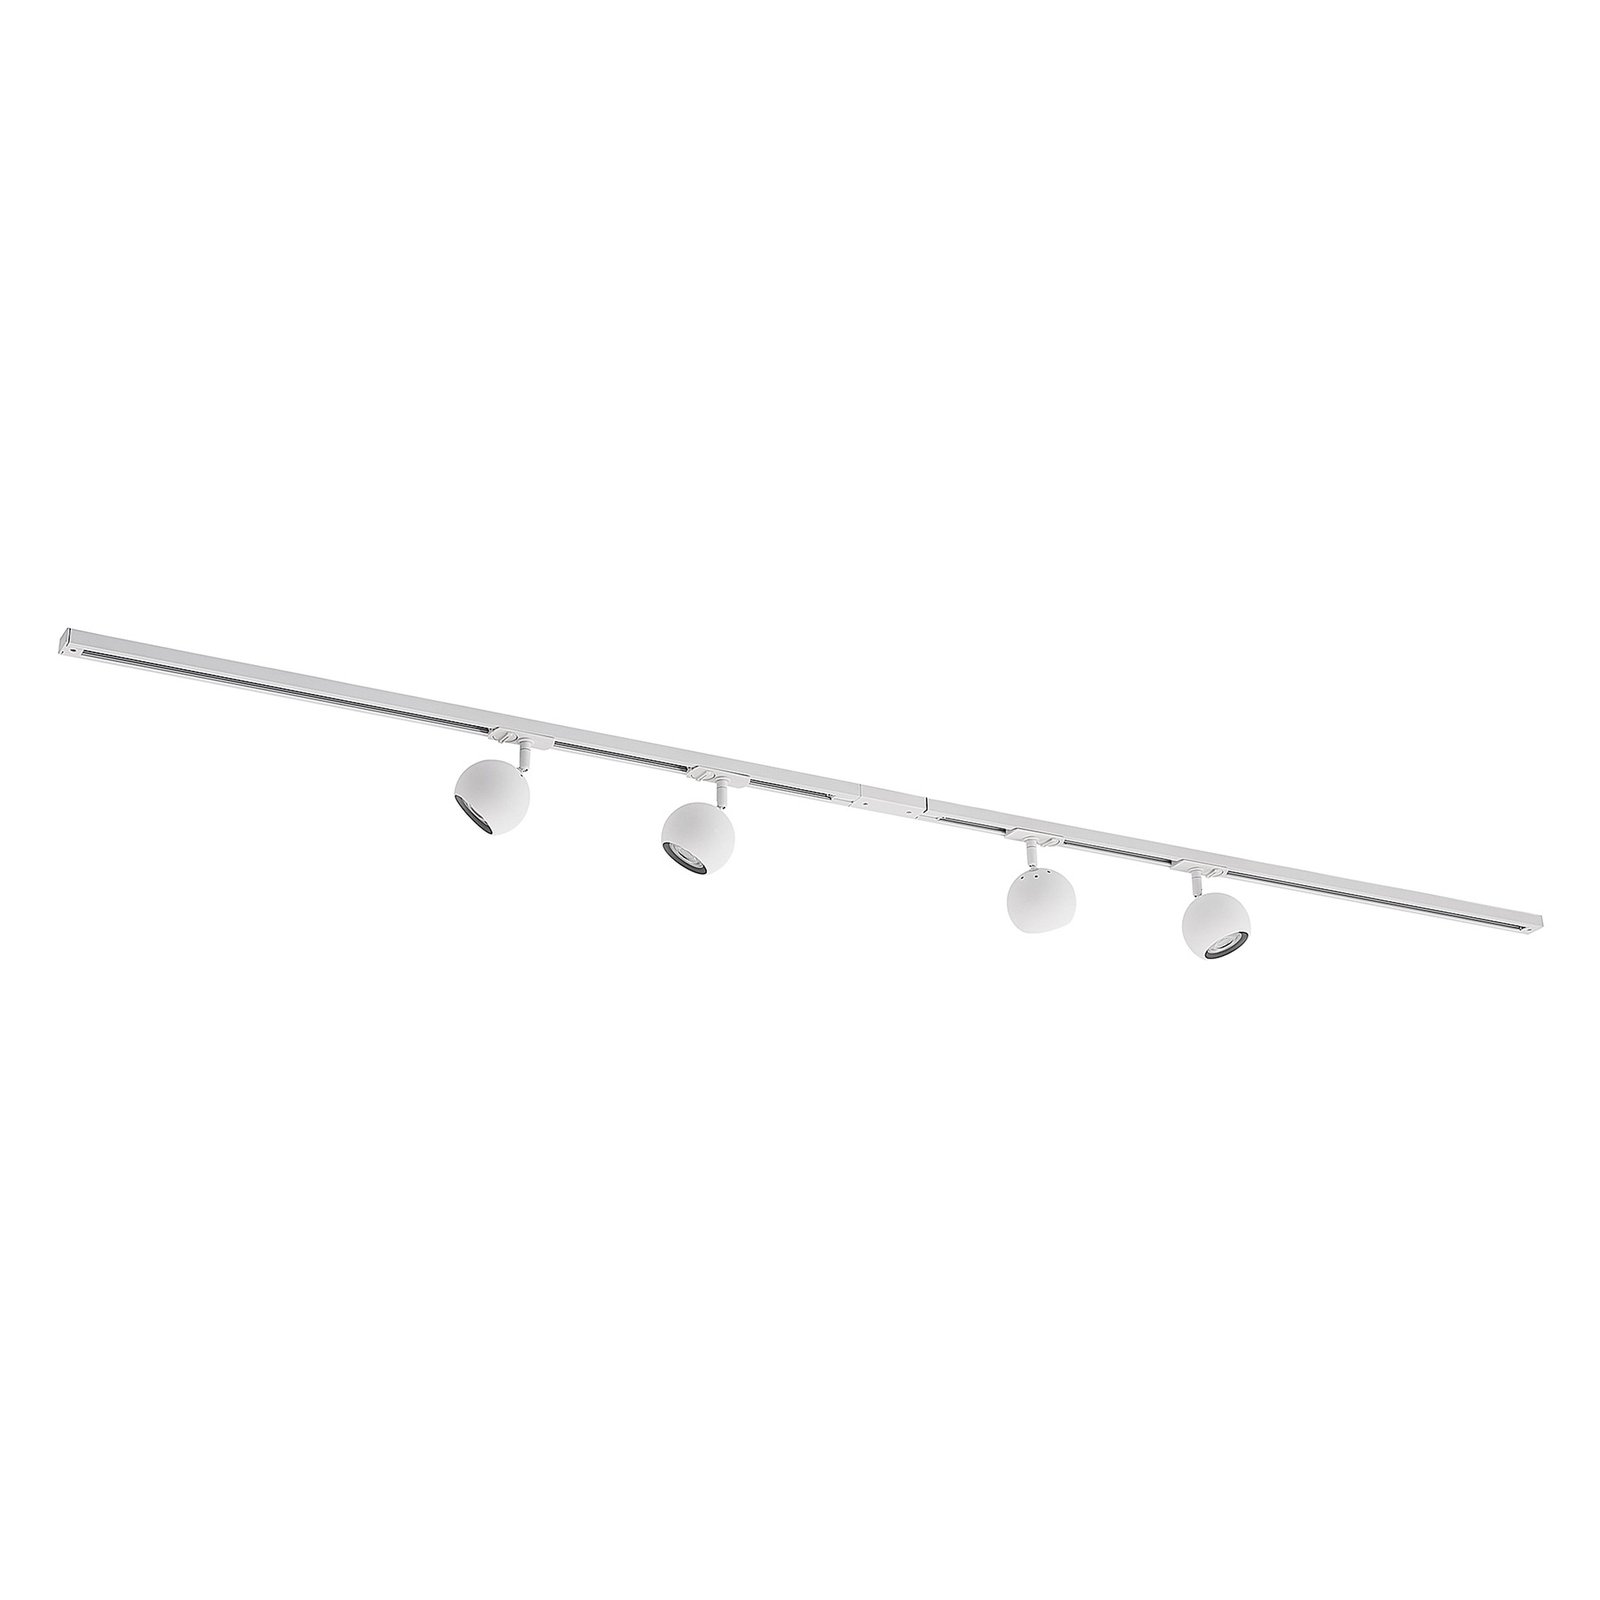 Lindby Linaro 1-fase-railsysteem, 4-lamps, wit